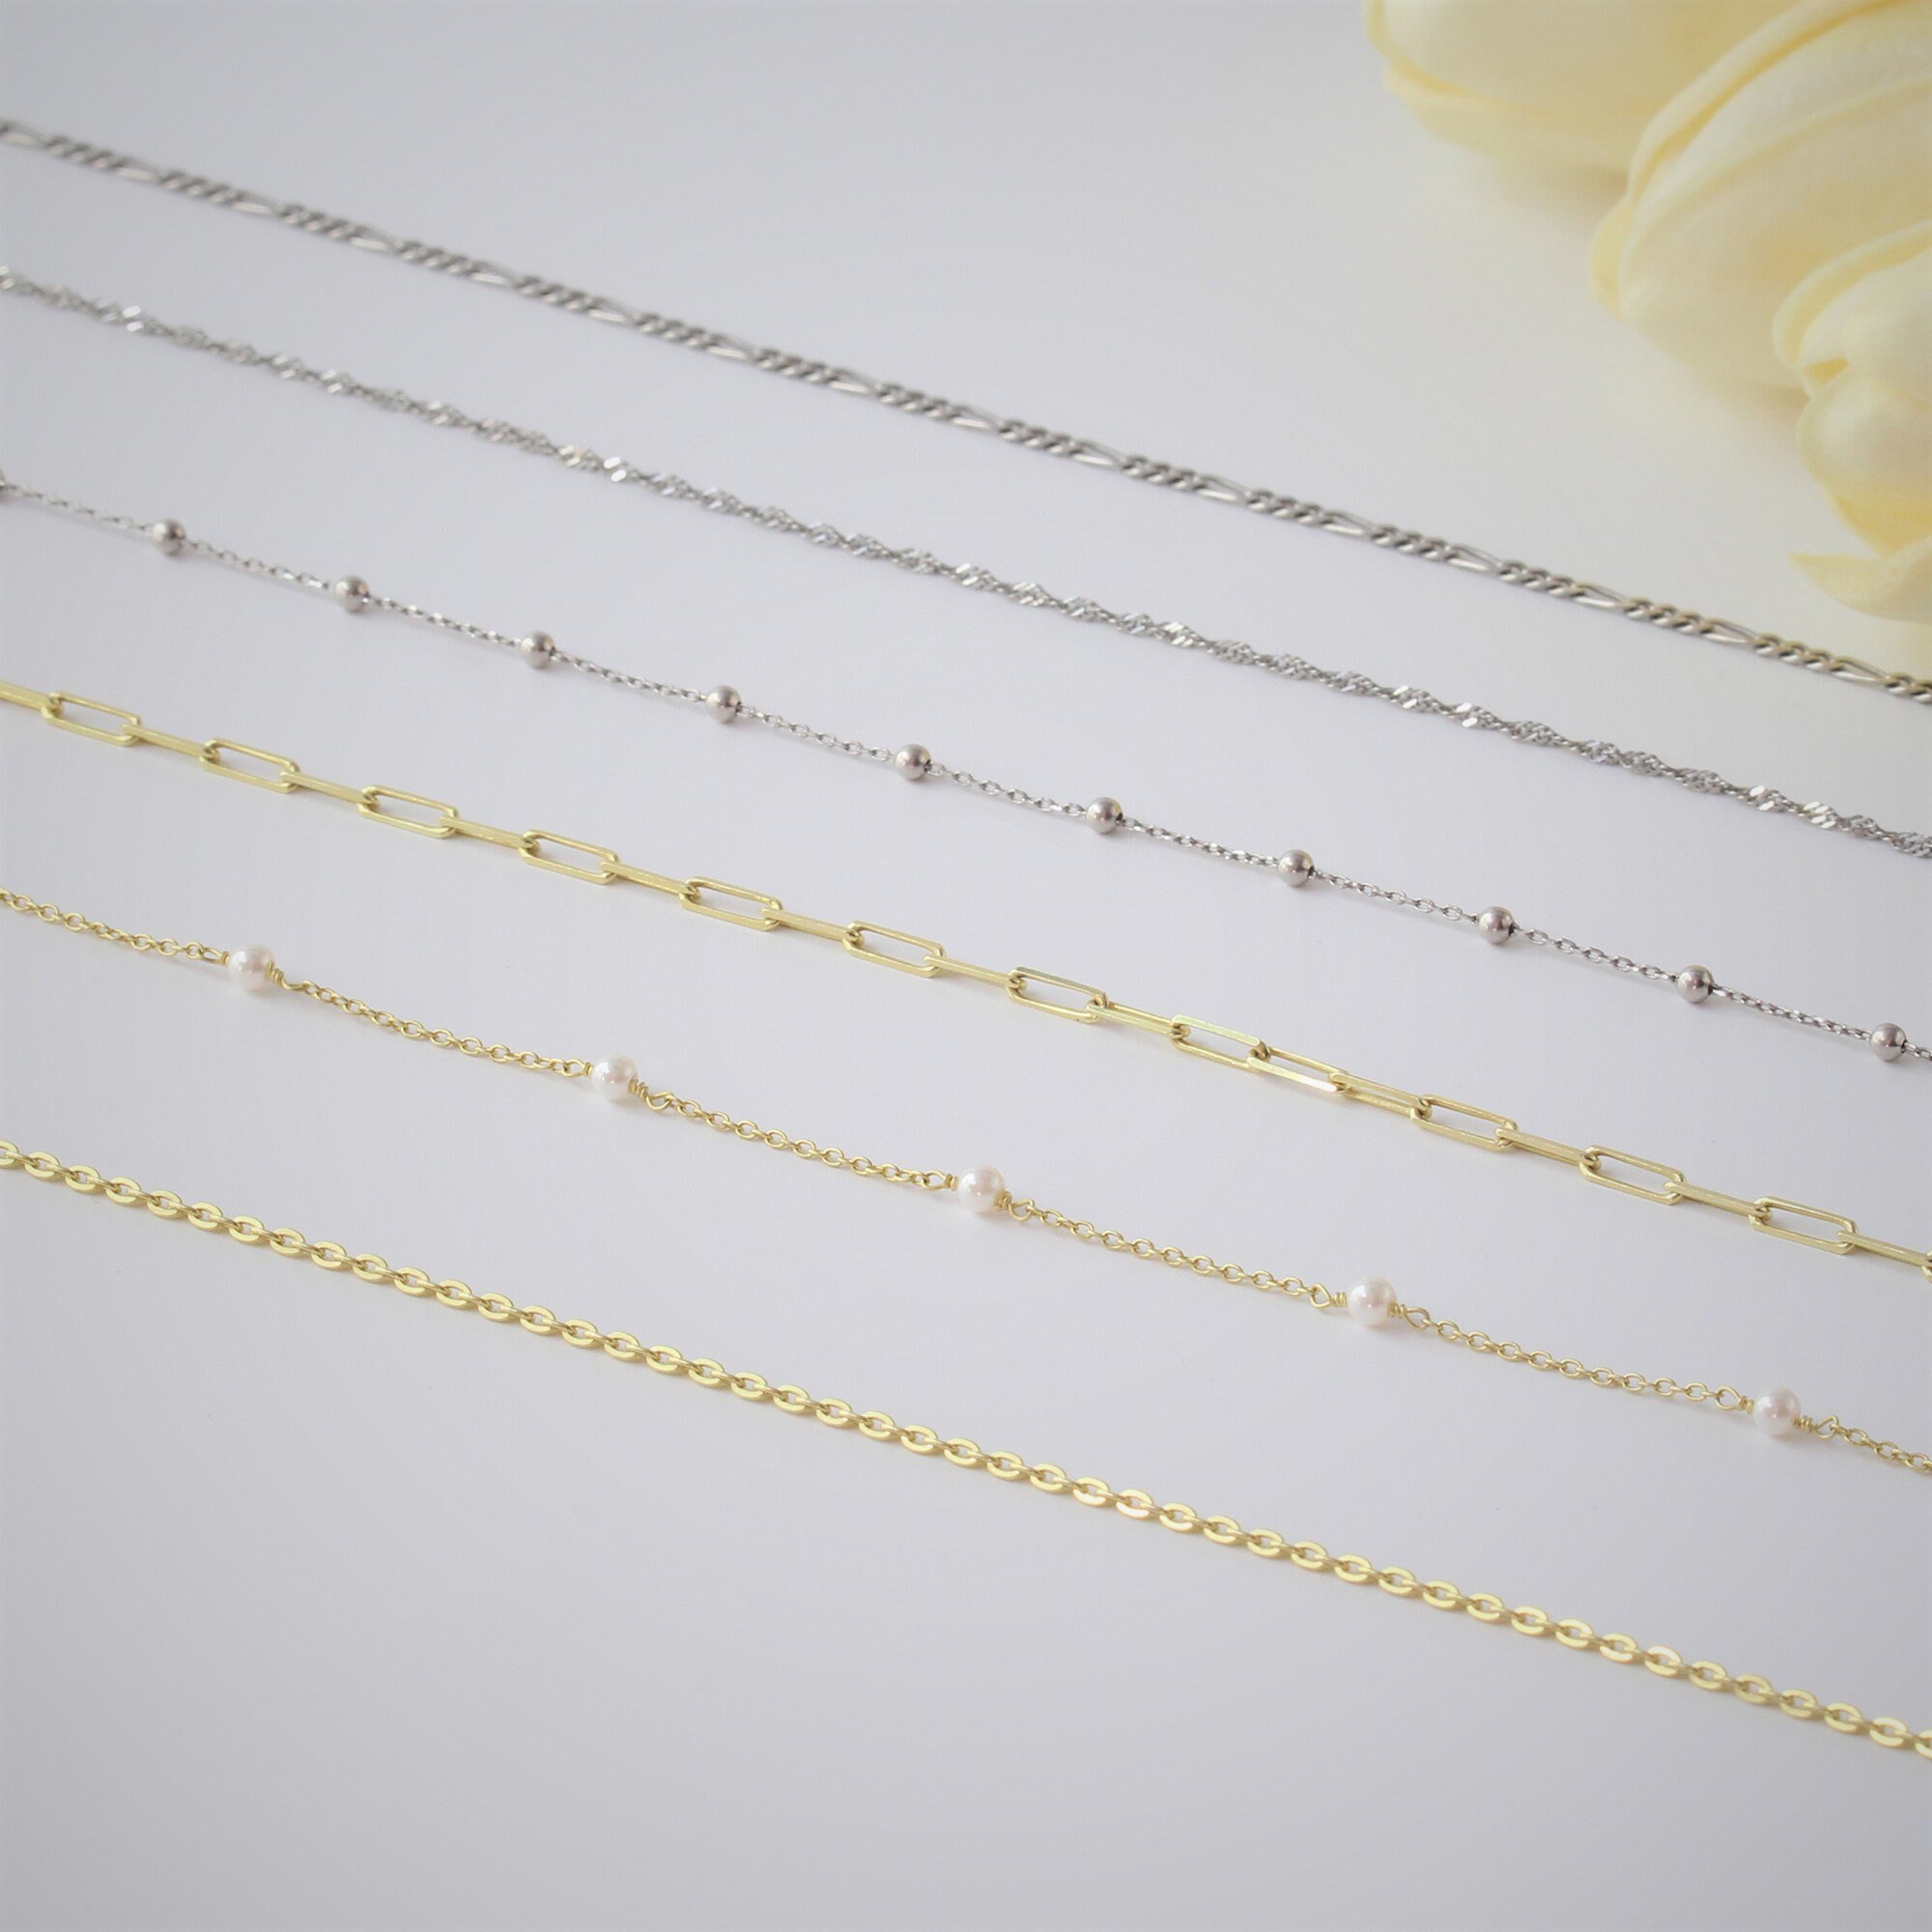 Gold Chains for Necklaces, Full Pearl Chain, Herringbone Chain, Pearl  Beaded Chain, Tiny Paperclip, Dainty Chain, Box Chain, Vine Chain 